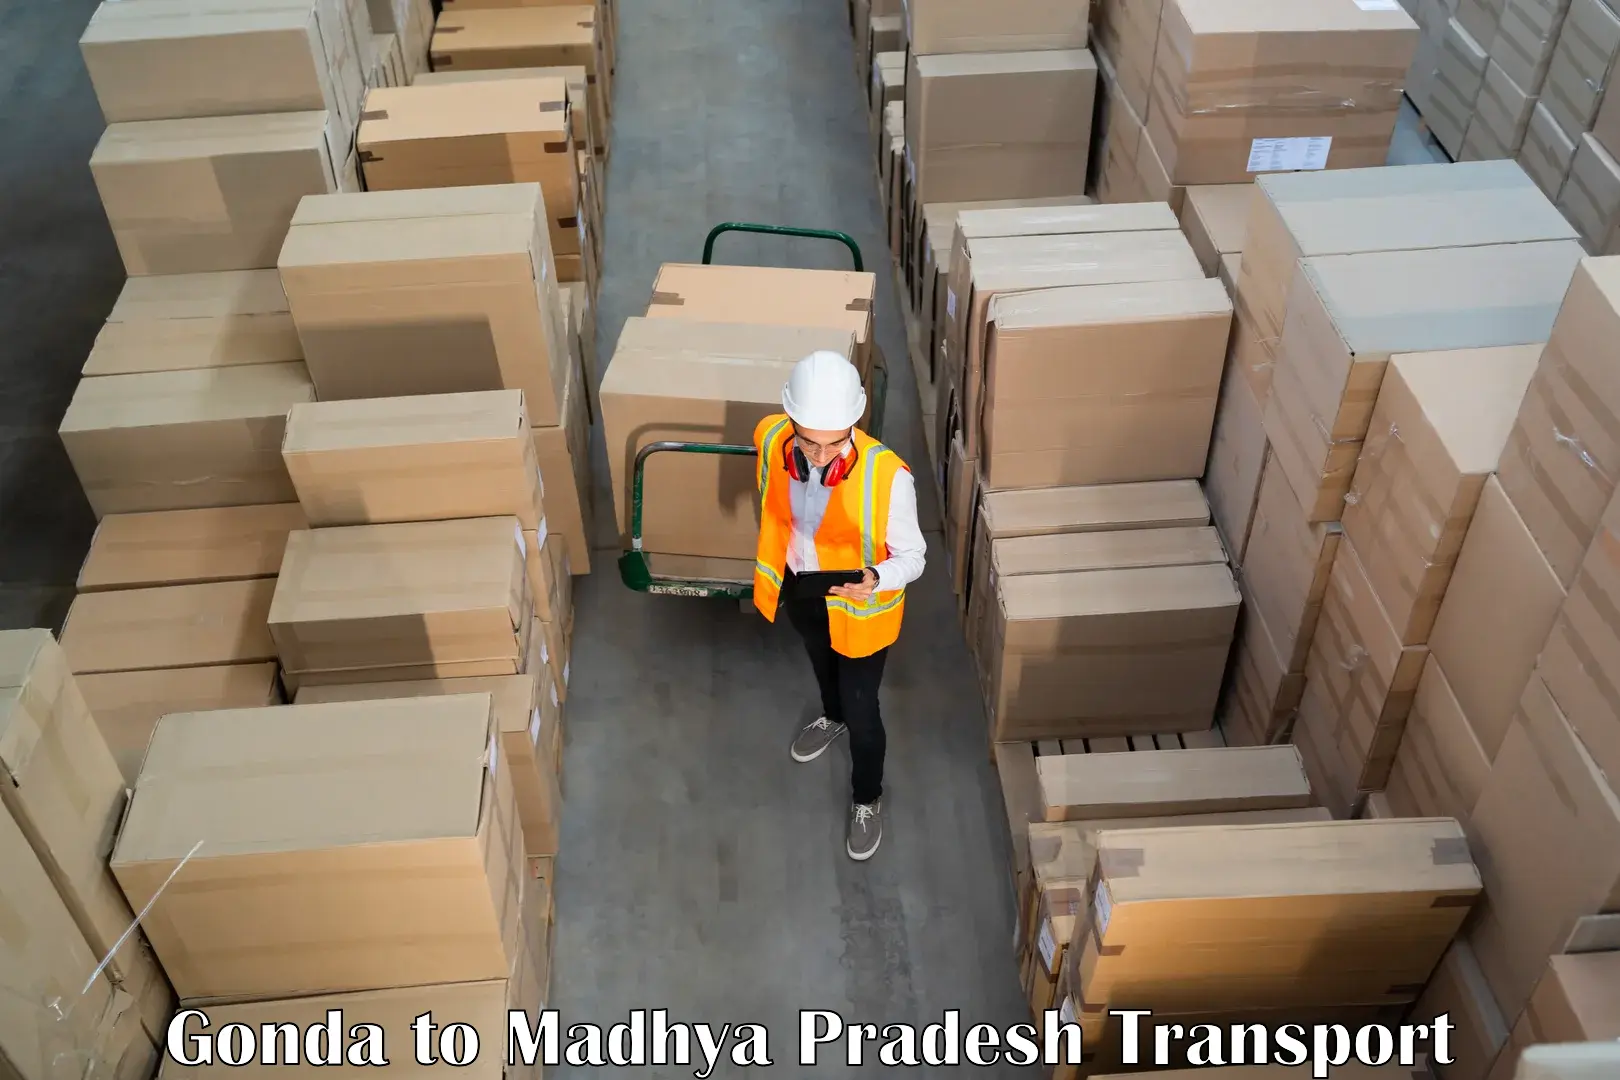 Nationwide transport services Gonda to Junnardeo